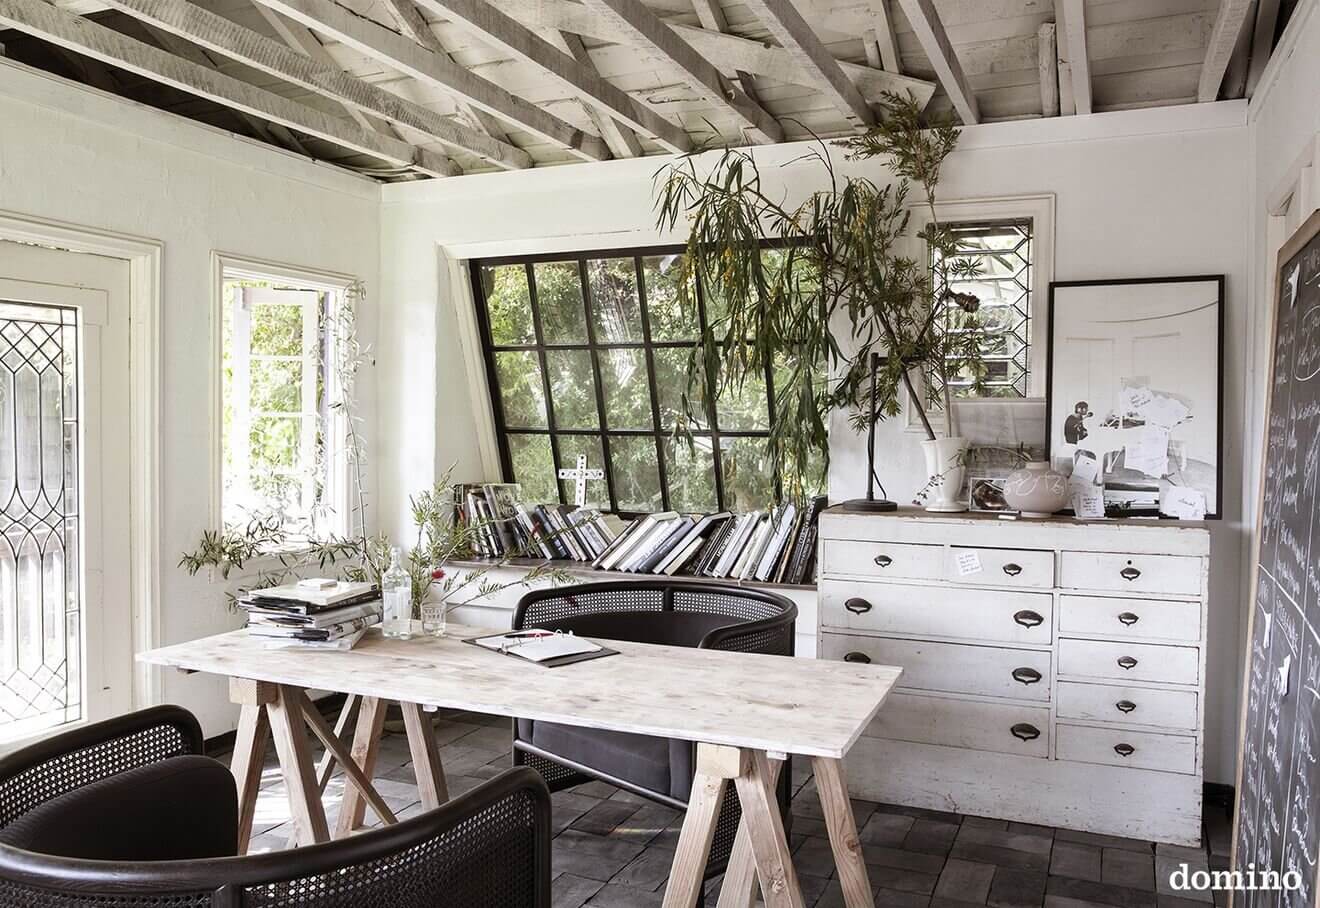 leanne ford rustic los angeles home nordroom10 Leanne Ford's Rustic Los Angeles Home (And It's For Sale)